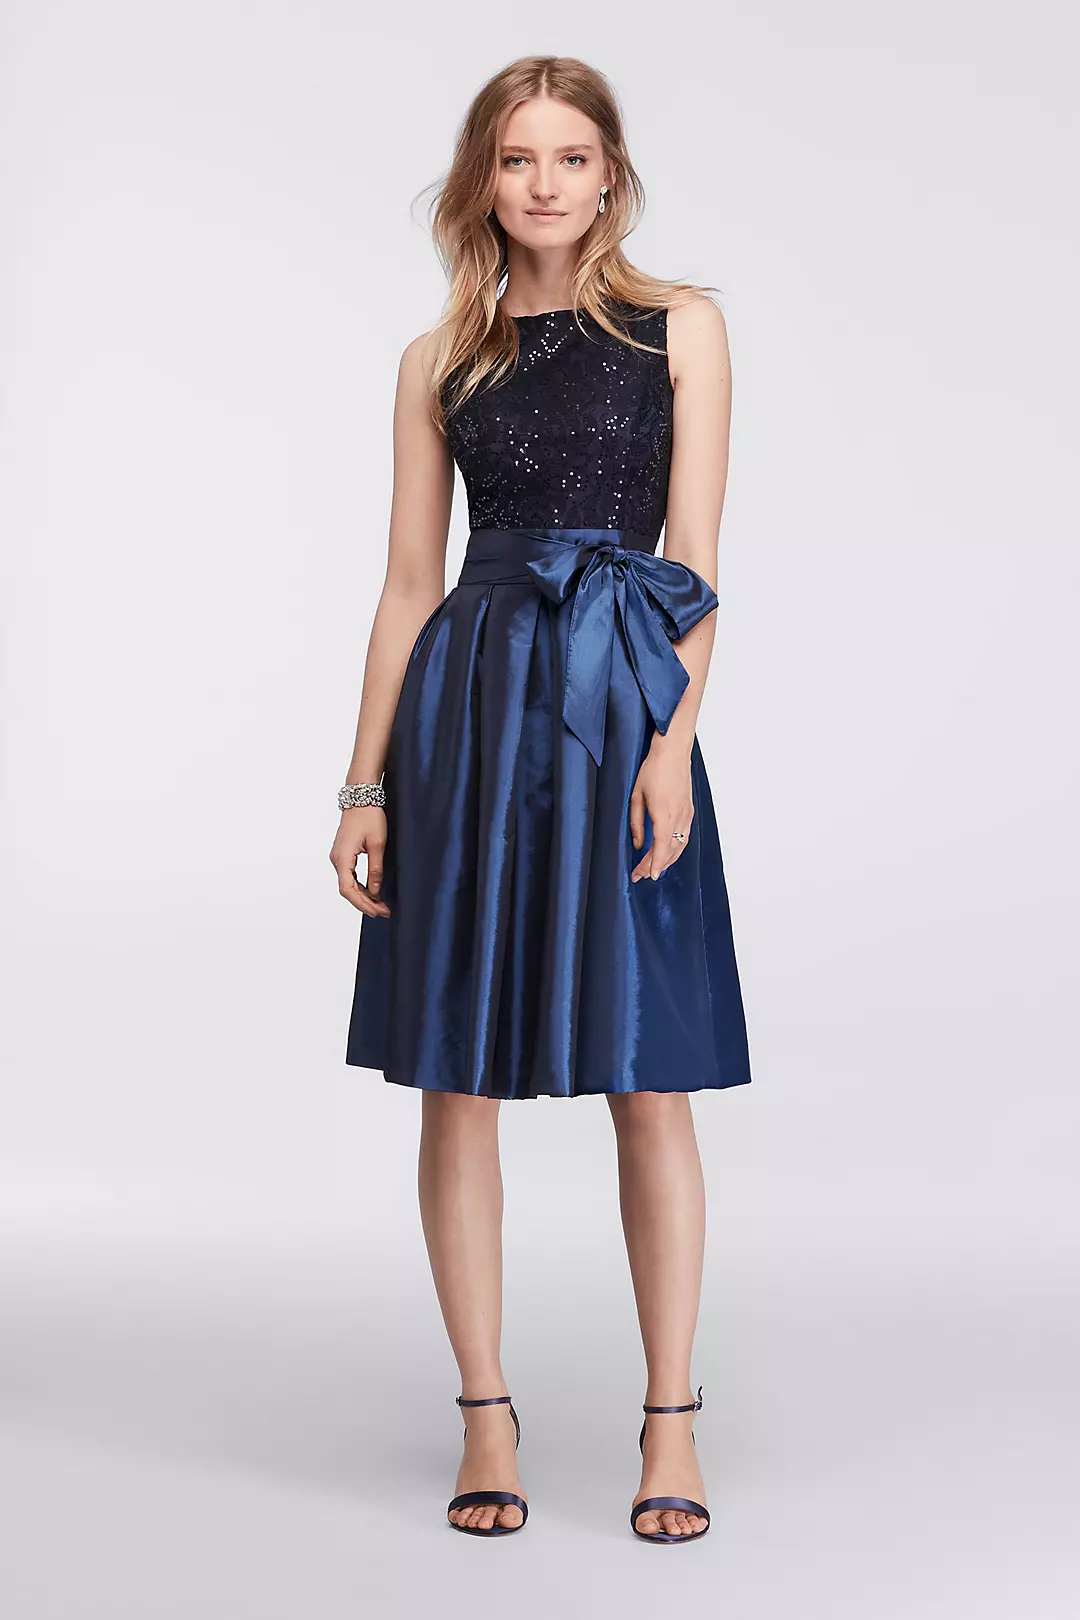 Short Dress with Full Skirt and Sequin Bodice Image